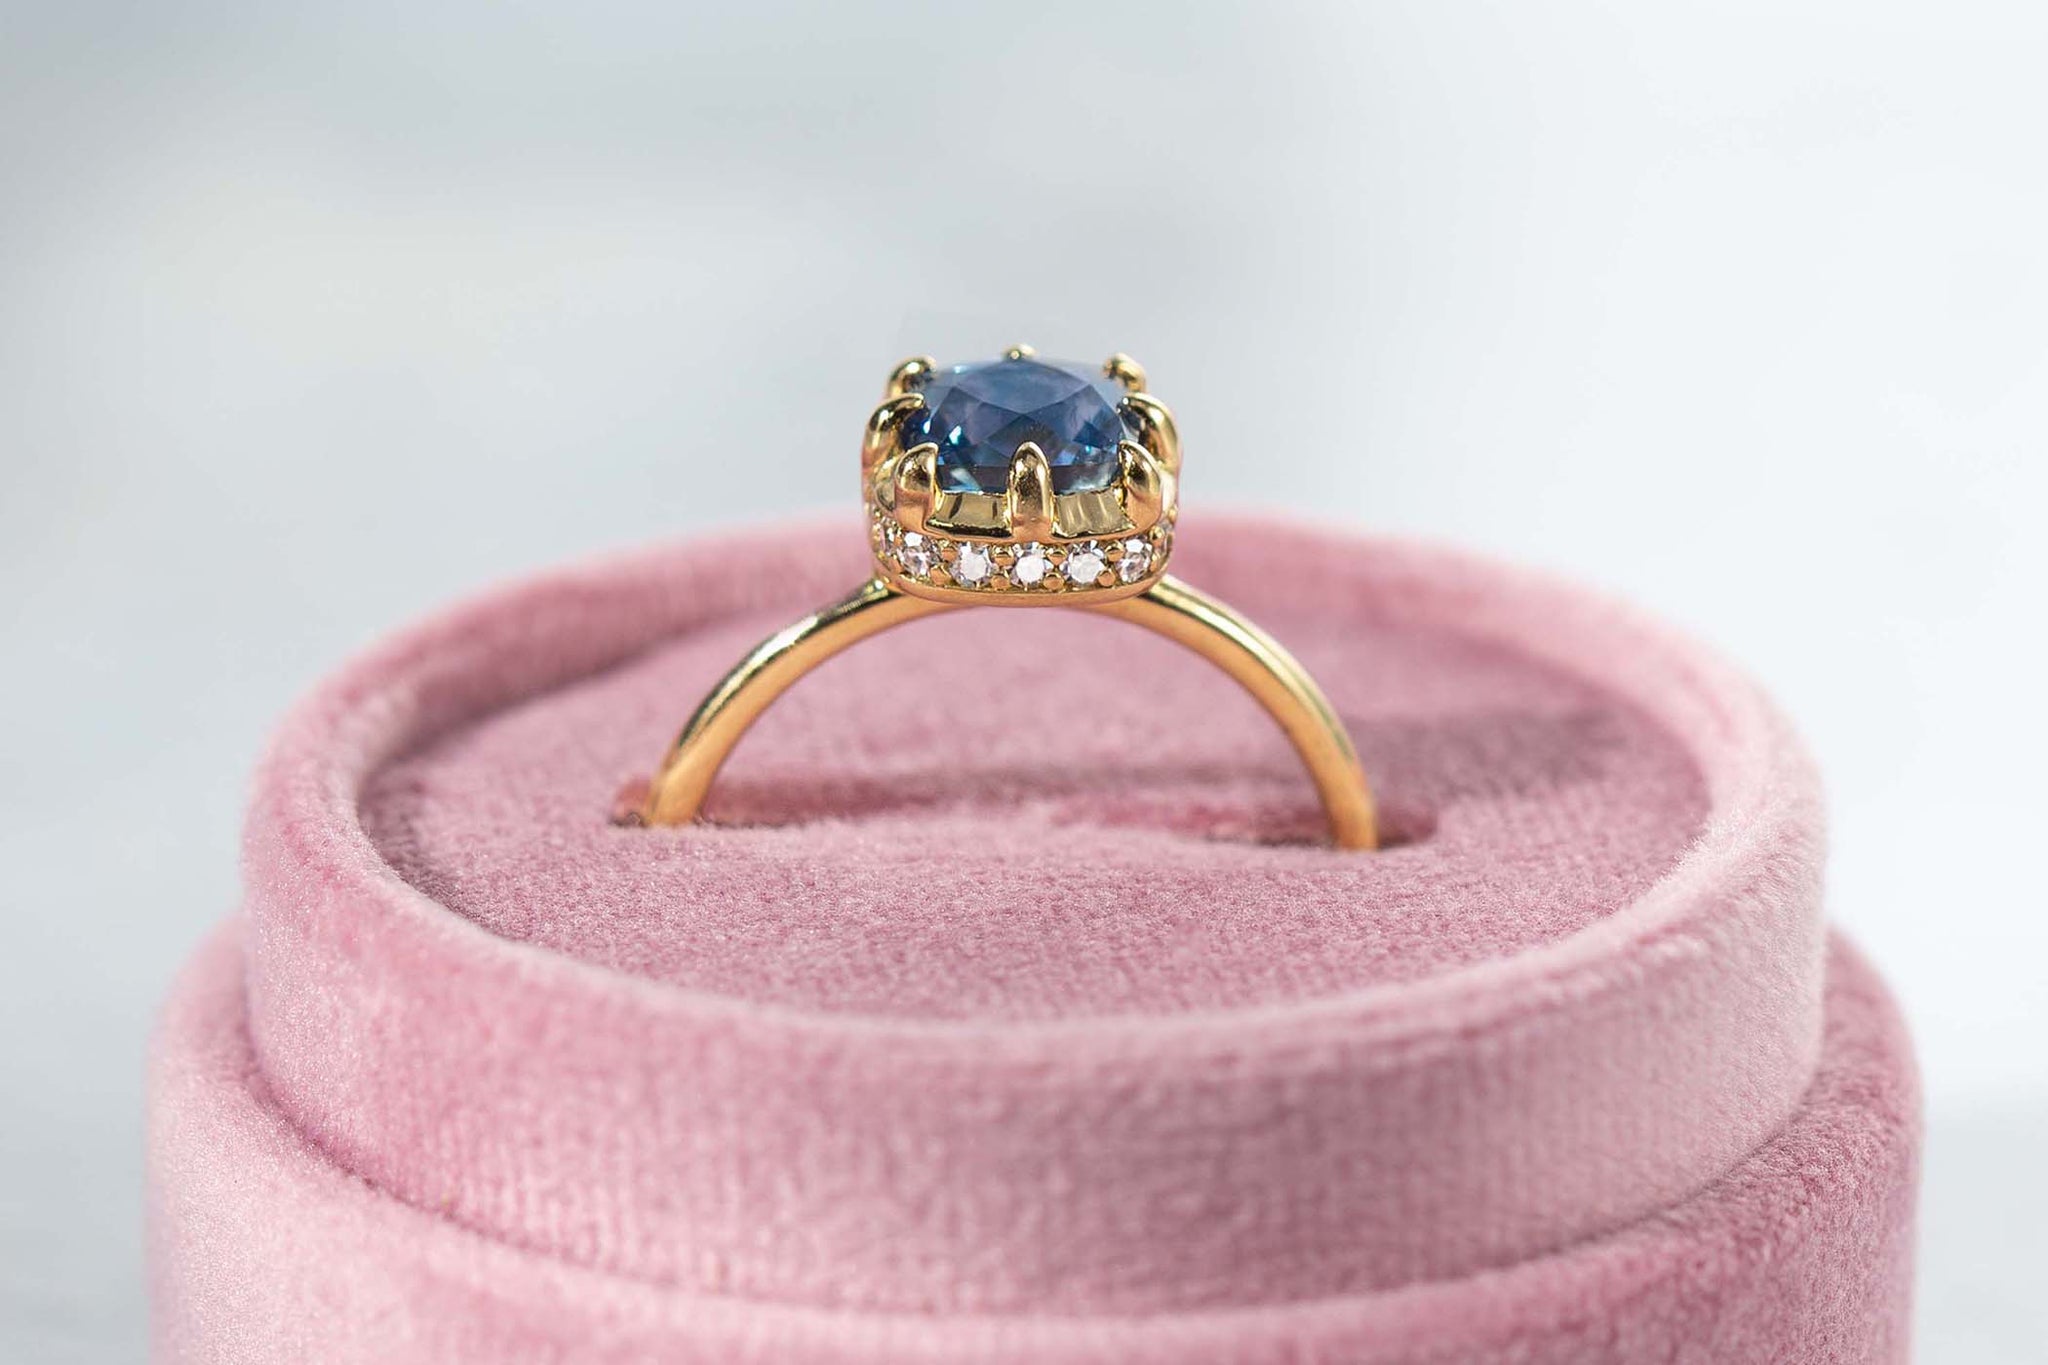 Montana Sapphire Recycled Gold Arabella Ring - S. Kind & Co